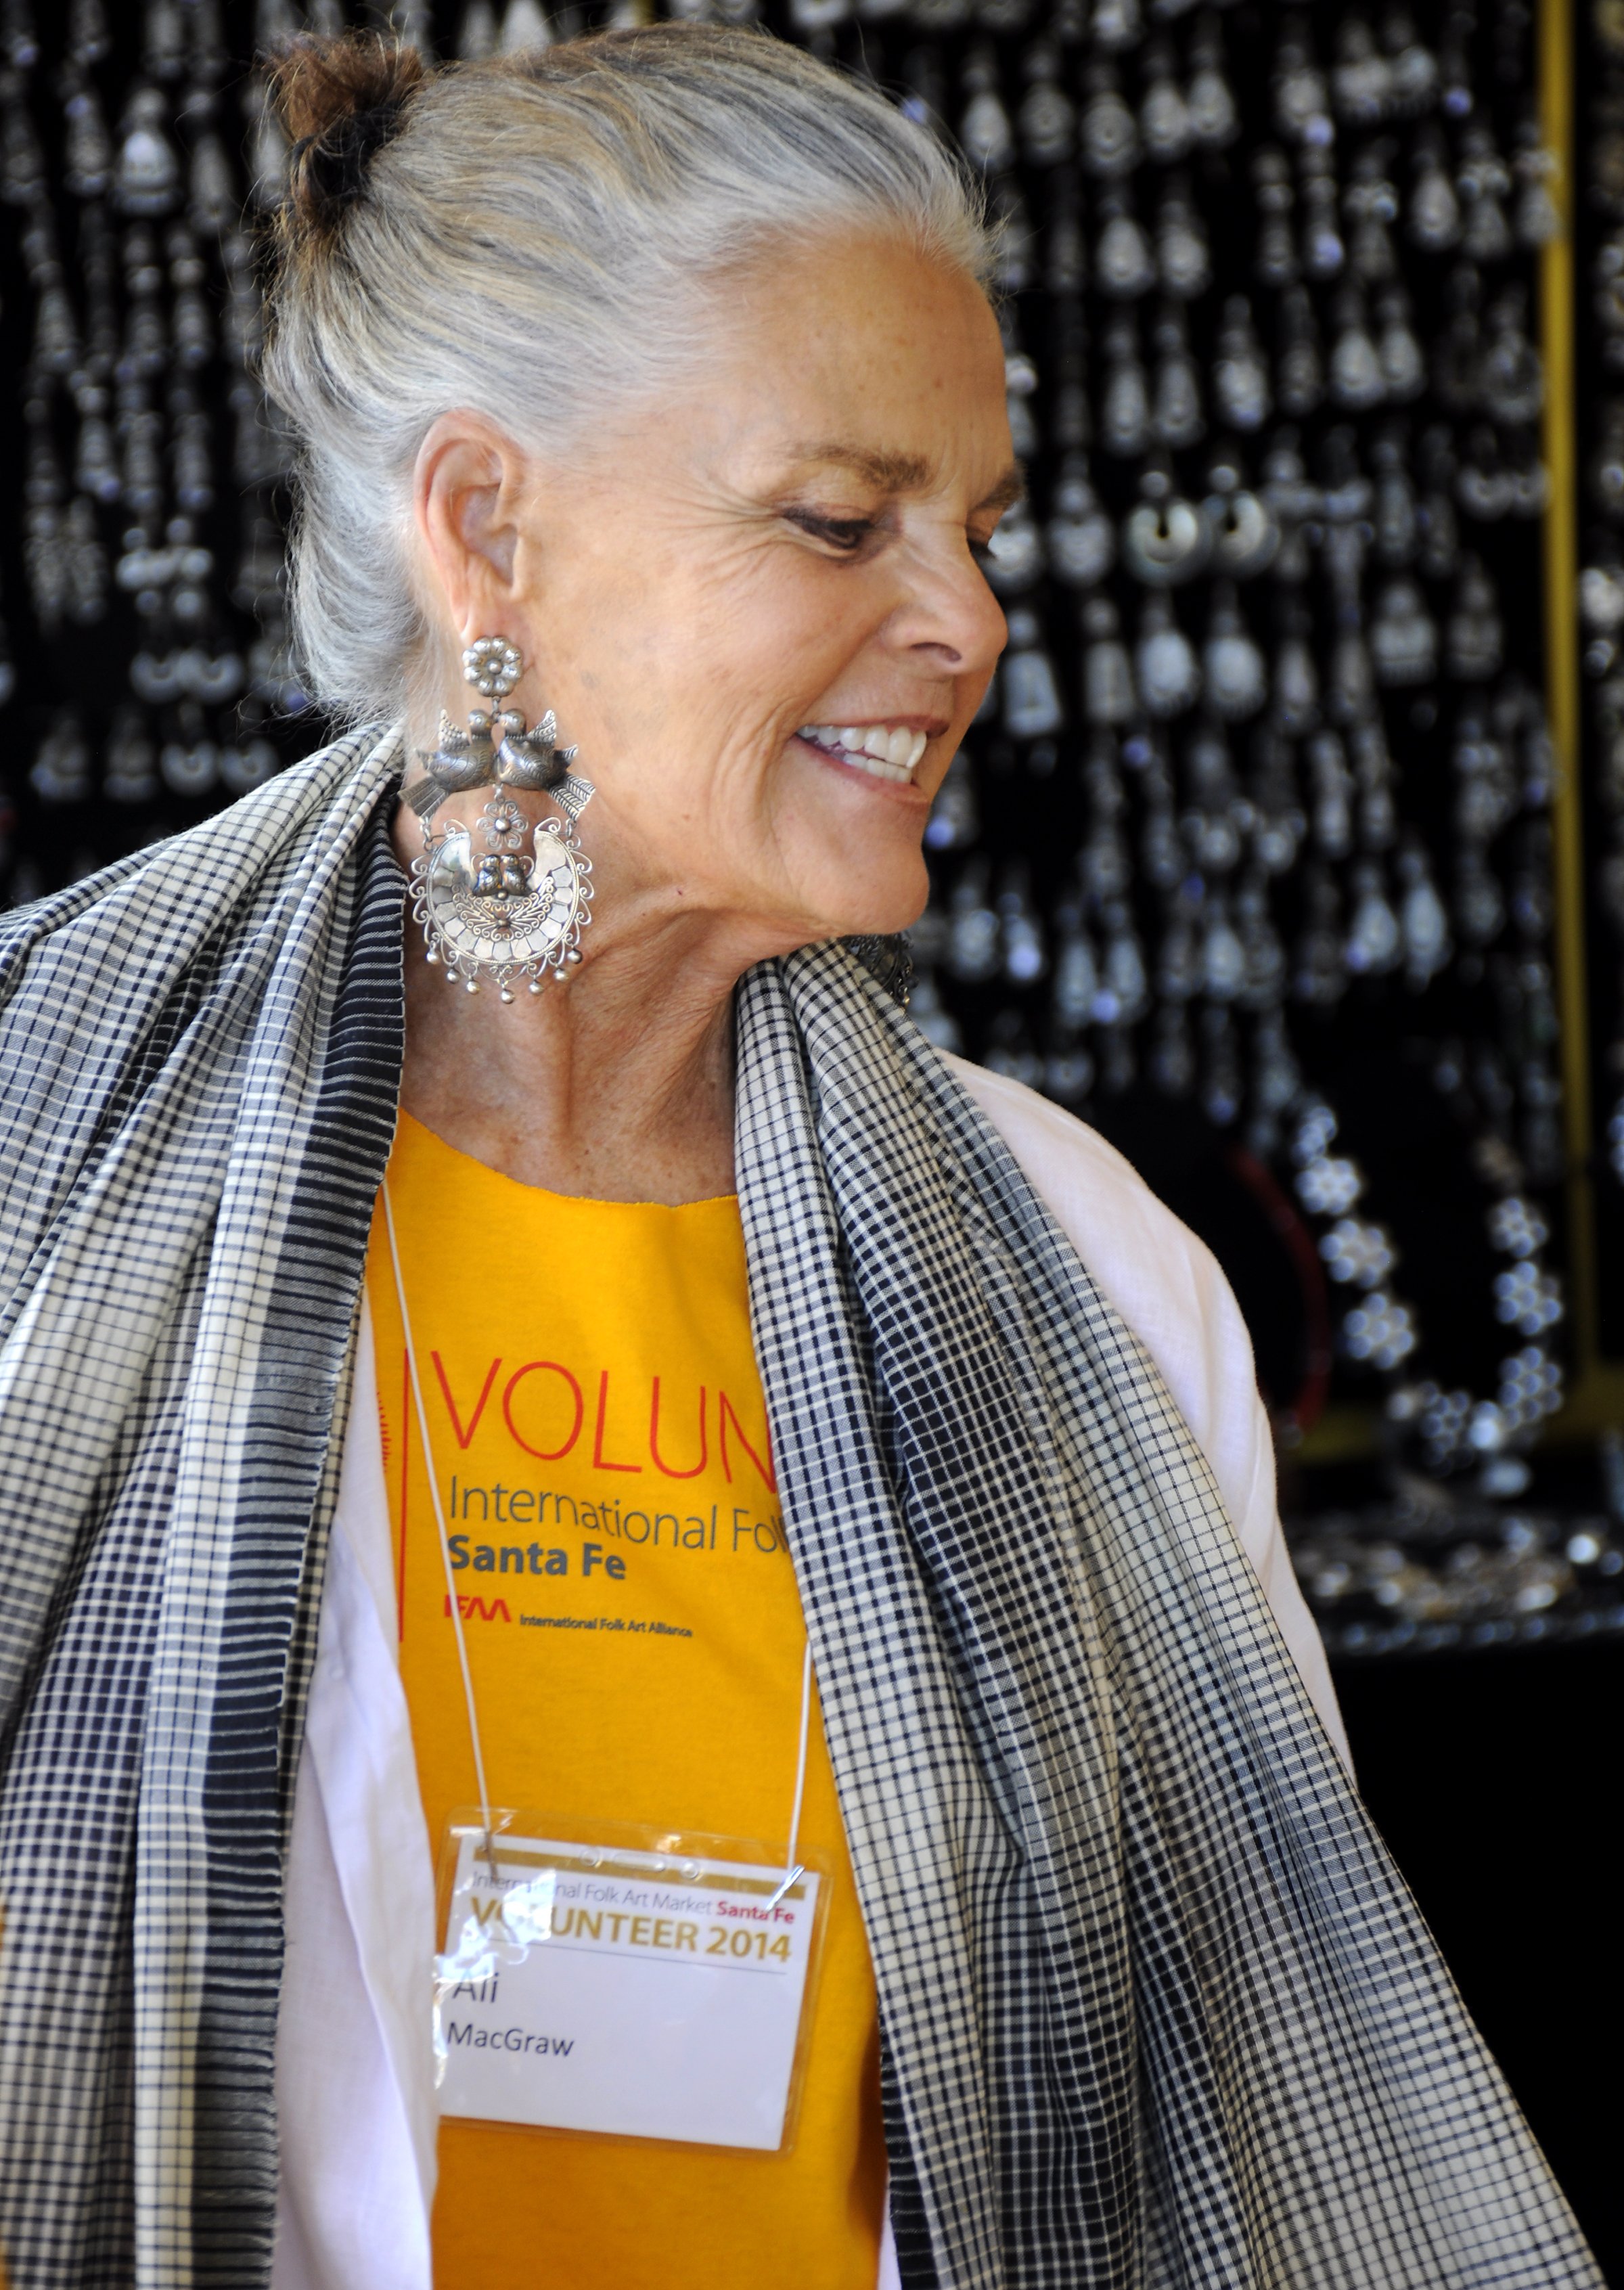 Ali MacGraw works as a volunteer at the annual International Folk Art Market on July 13, 2014, in Santa Fe, New Mexico. | Source: Getty Images